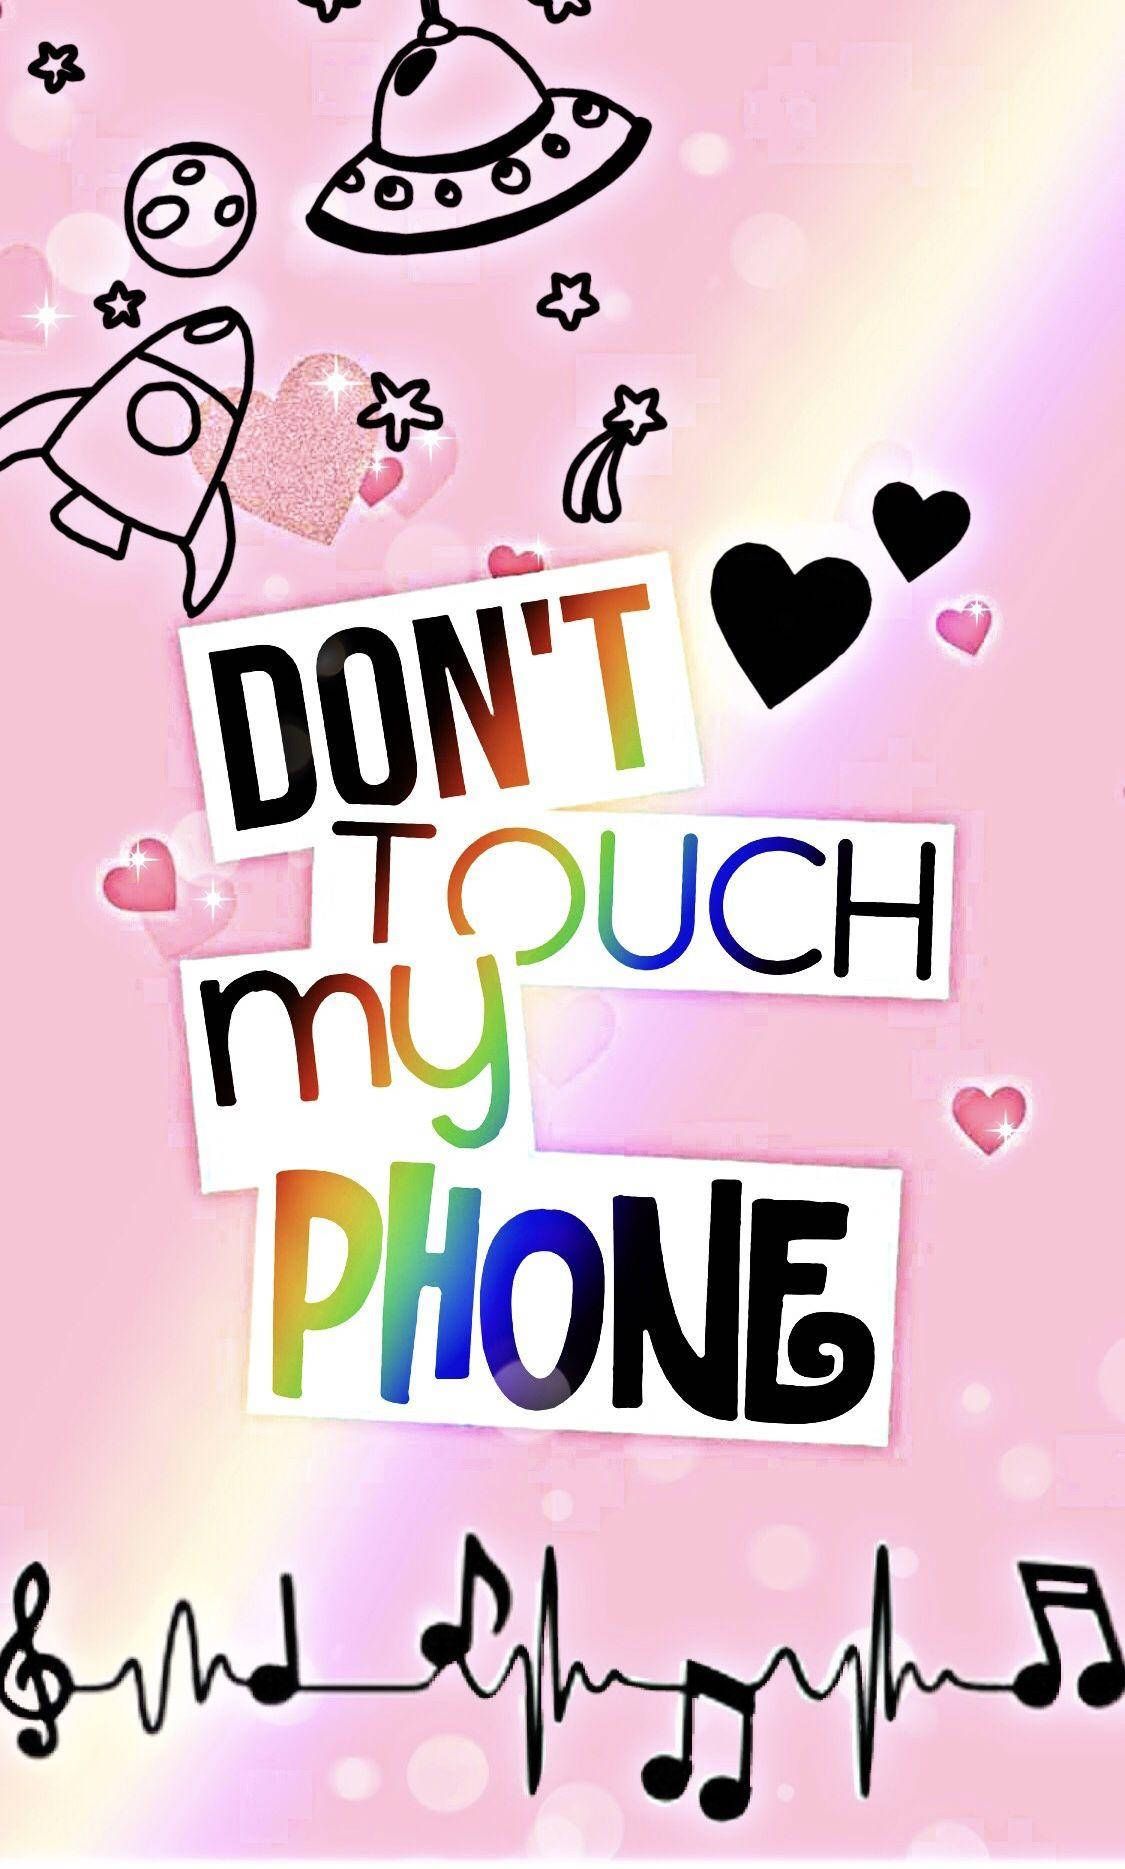 Wallpaper don't touch my phone - Don't touch my phone